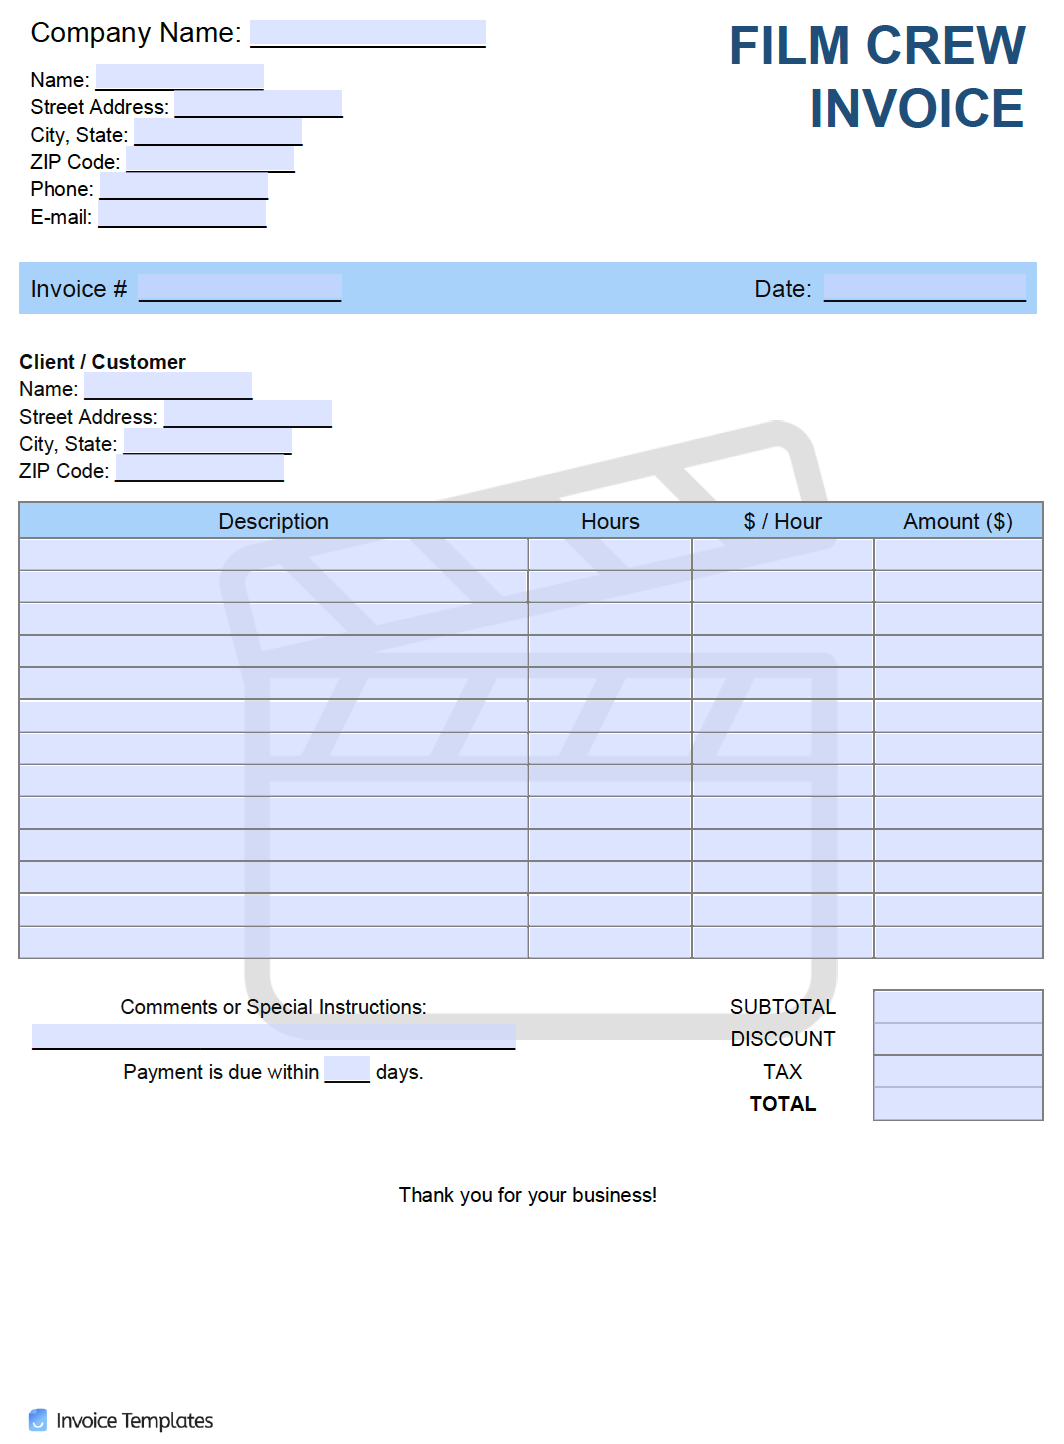 Free Film Crew Invoice Template  PDF  WORD  EXCEL With Film Invoice Template